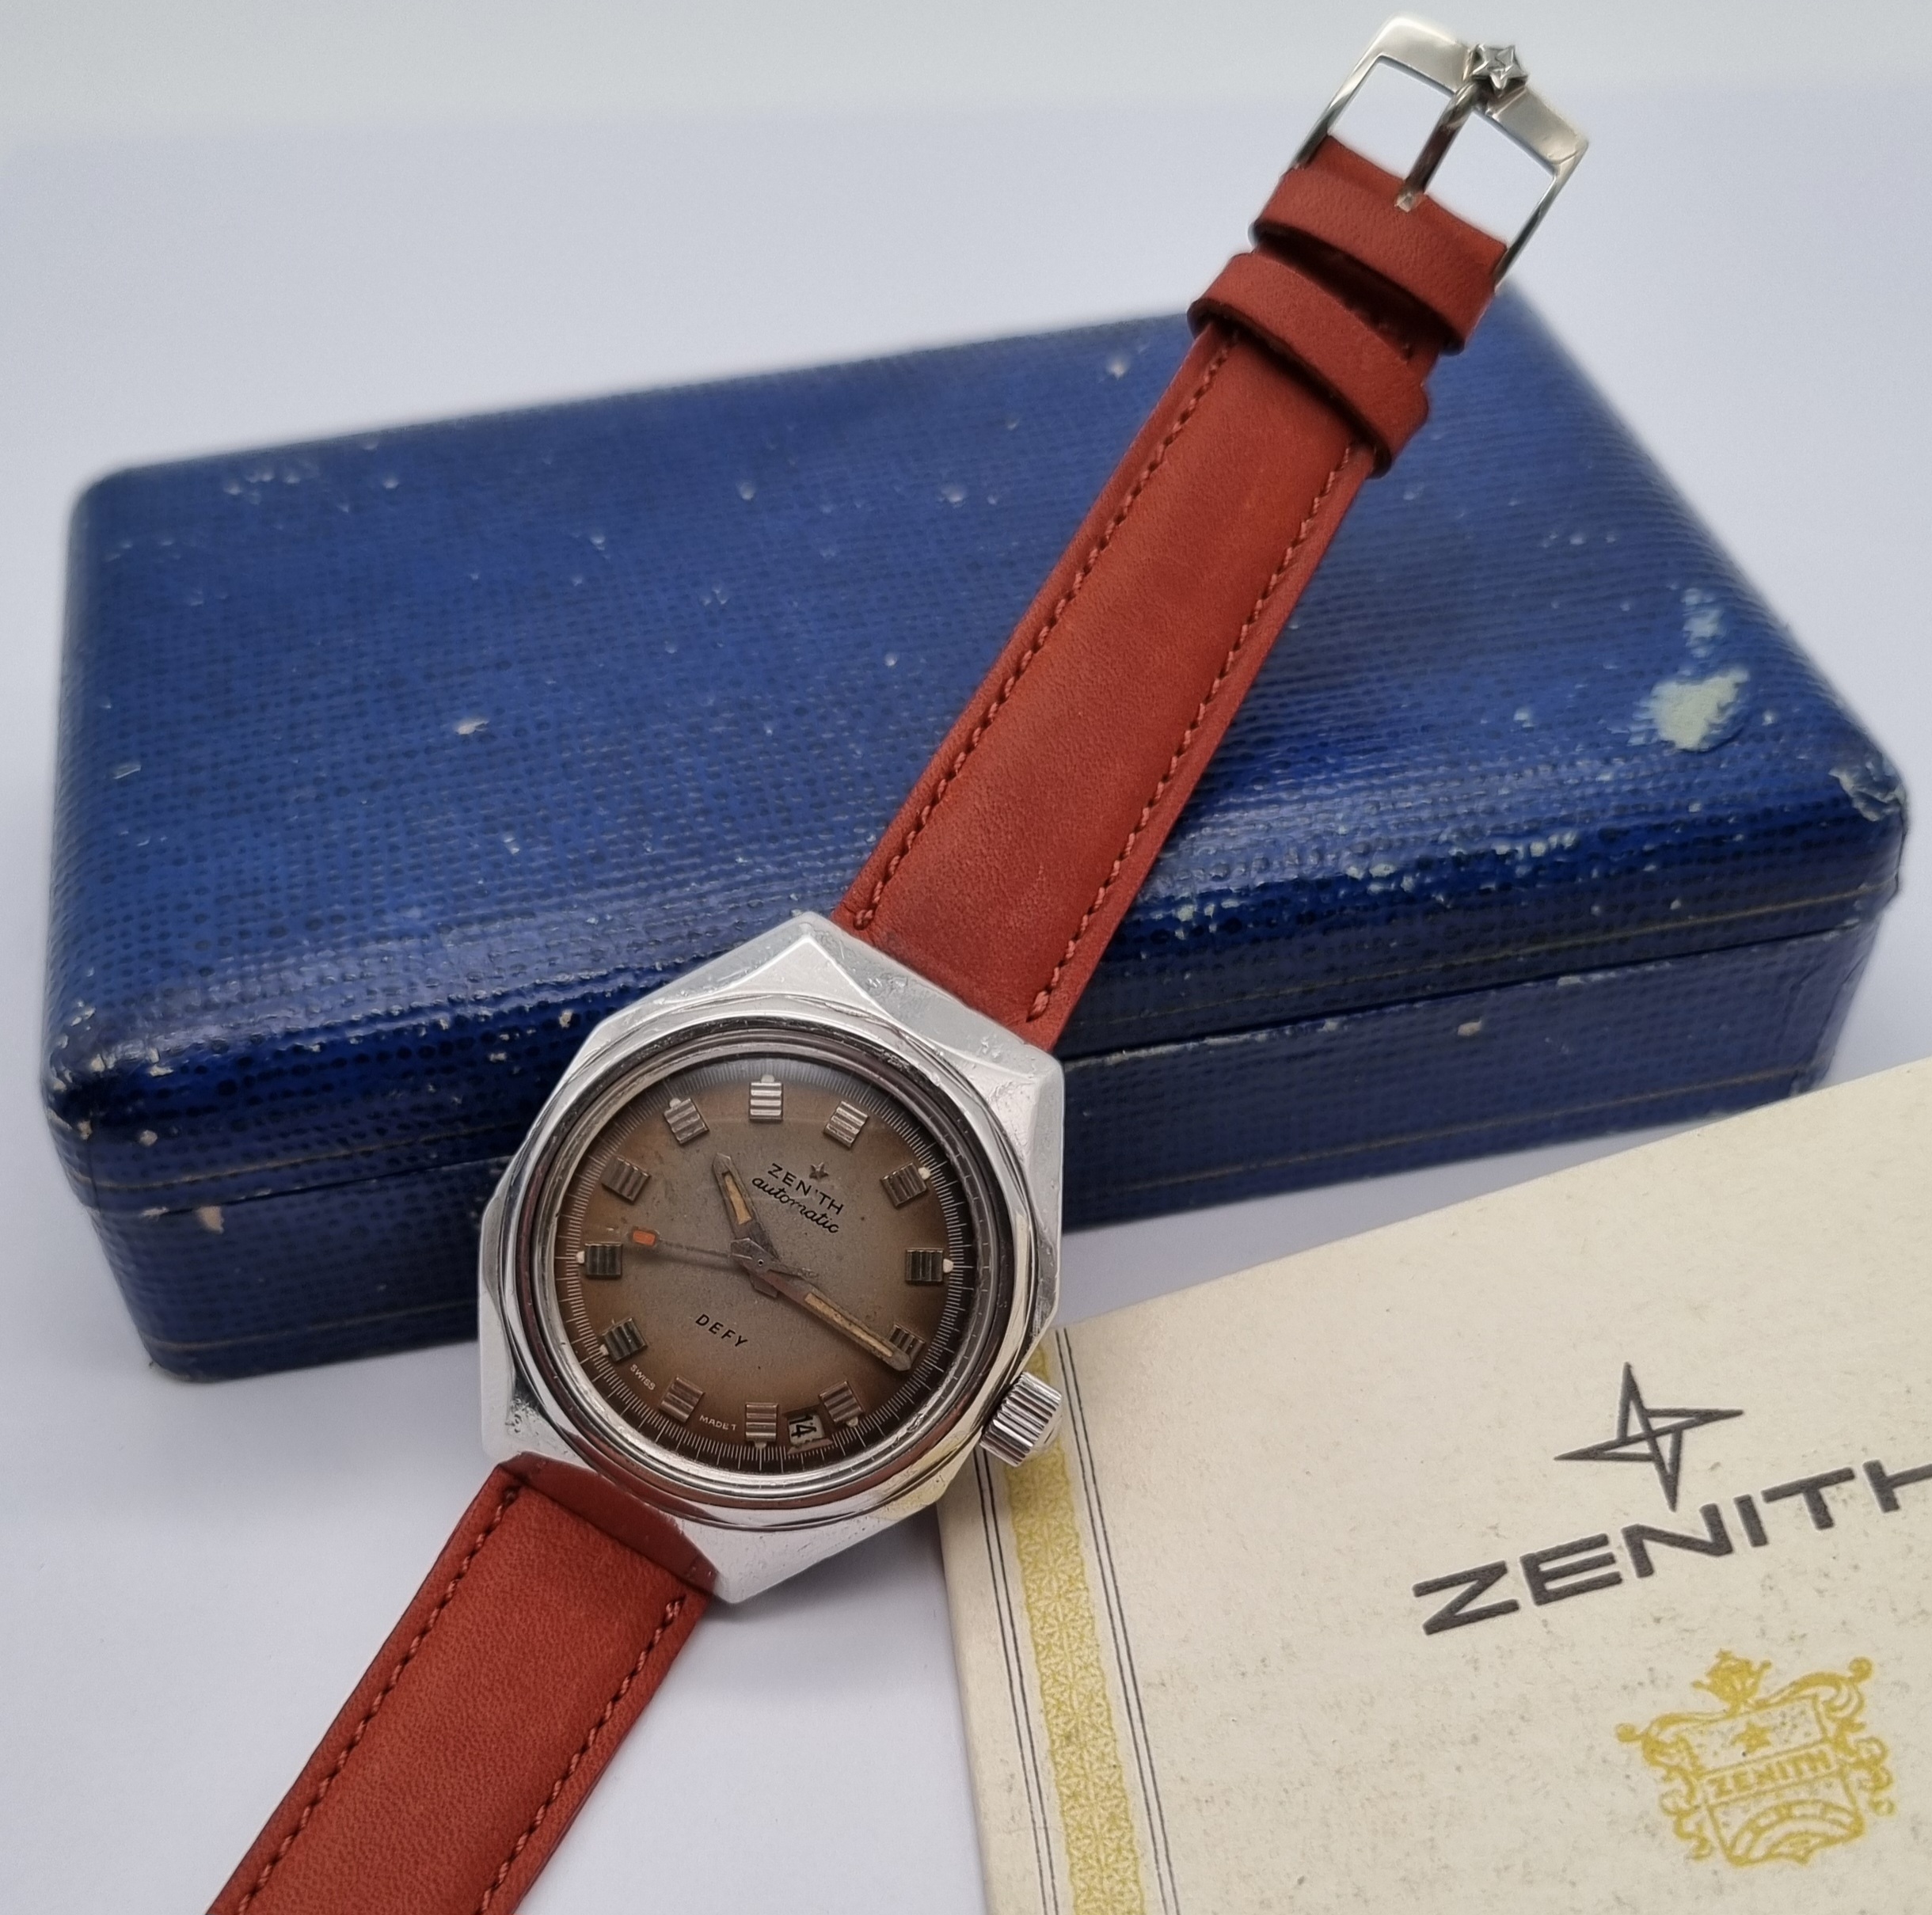 Zenith Defy Defy Tropical Dial Vintage Diver Mm 37 On Leather Serviced Full Set 1970 Used Condition | San Giorgio a Cremano